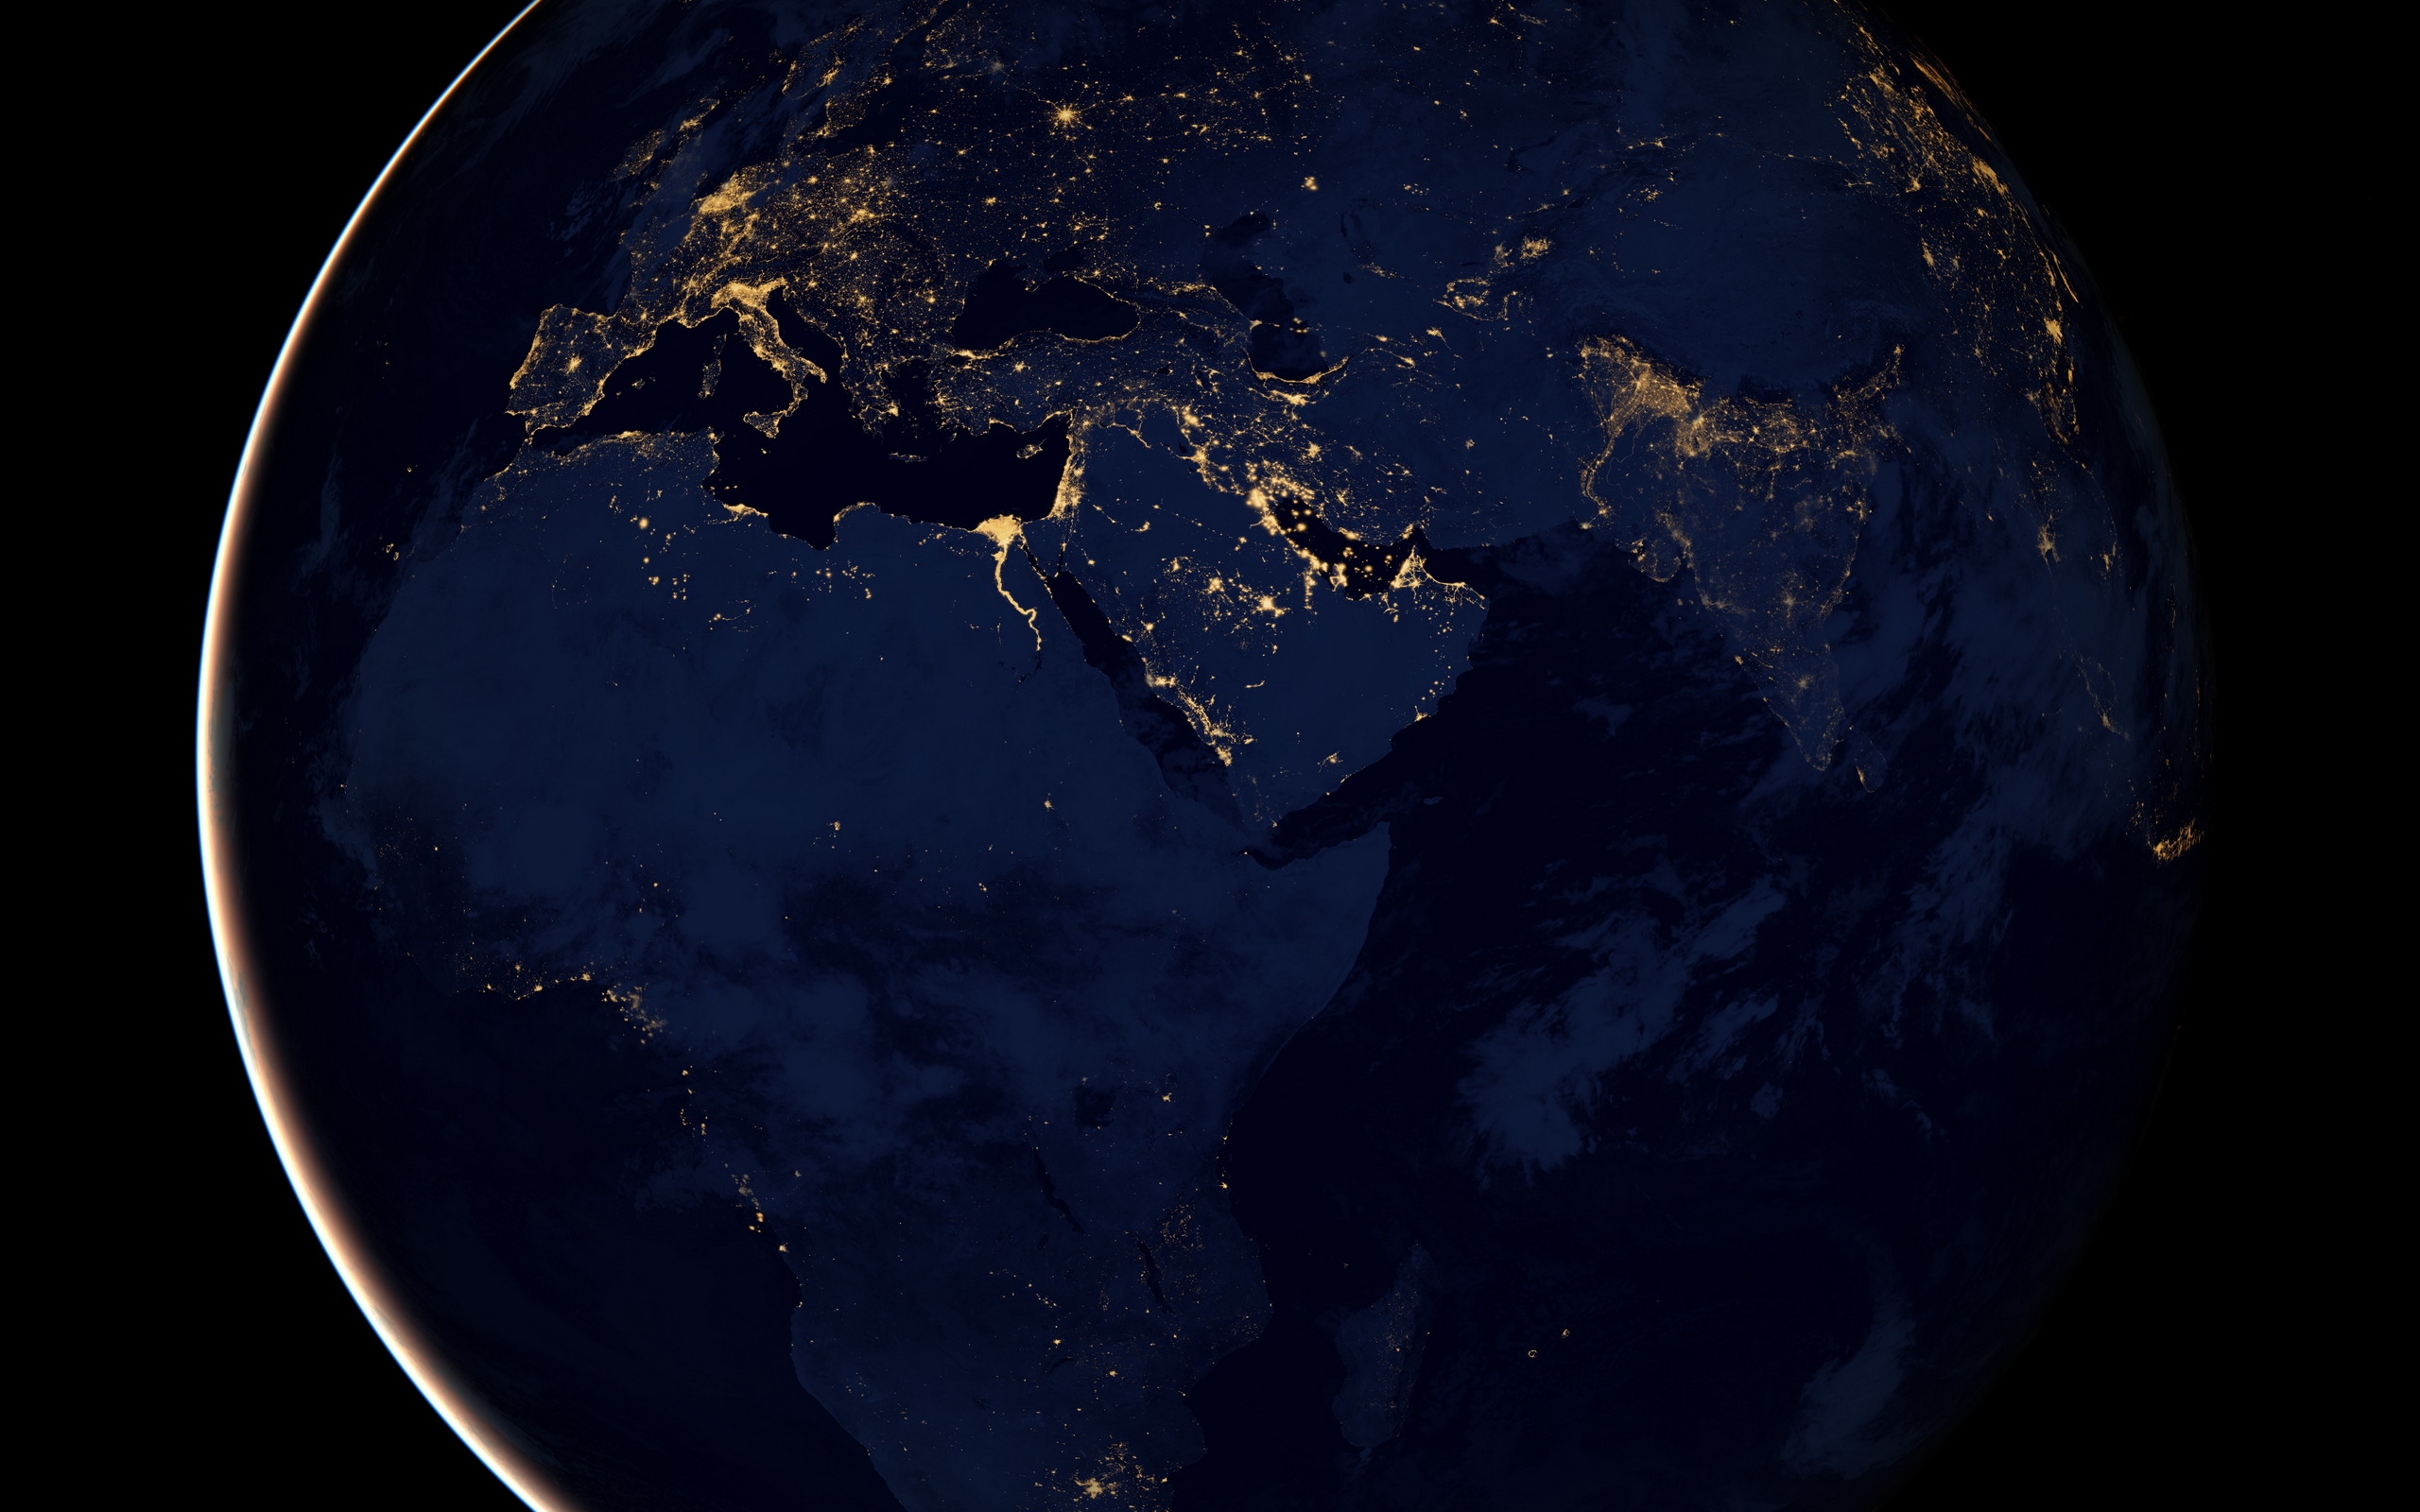 Wallpapers planet earth night on the desktop